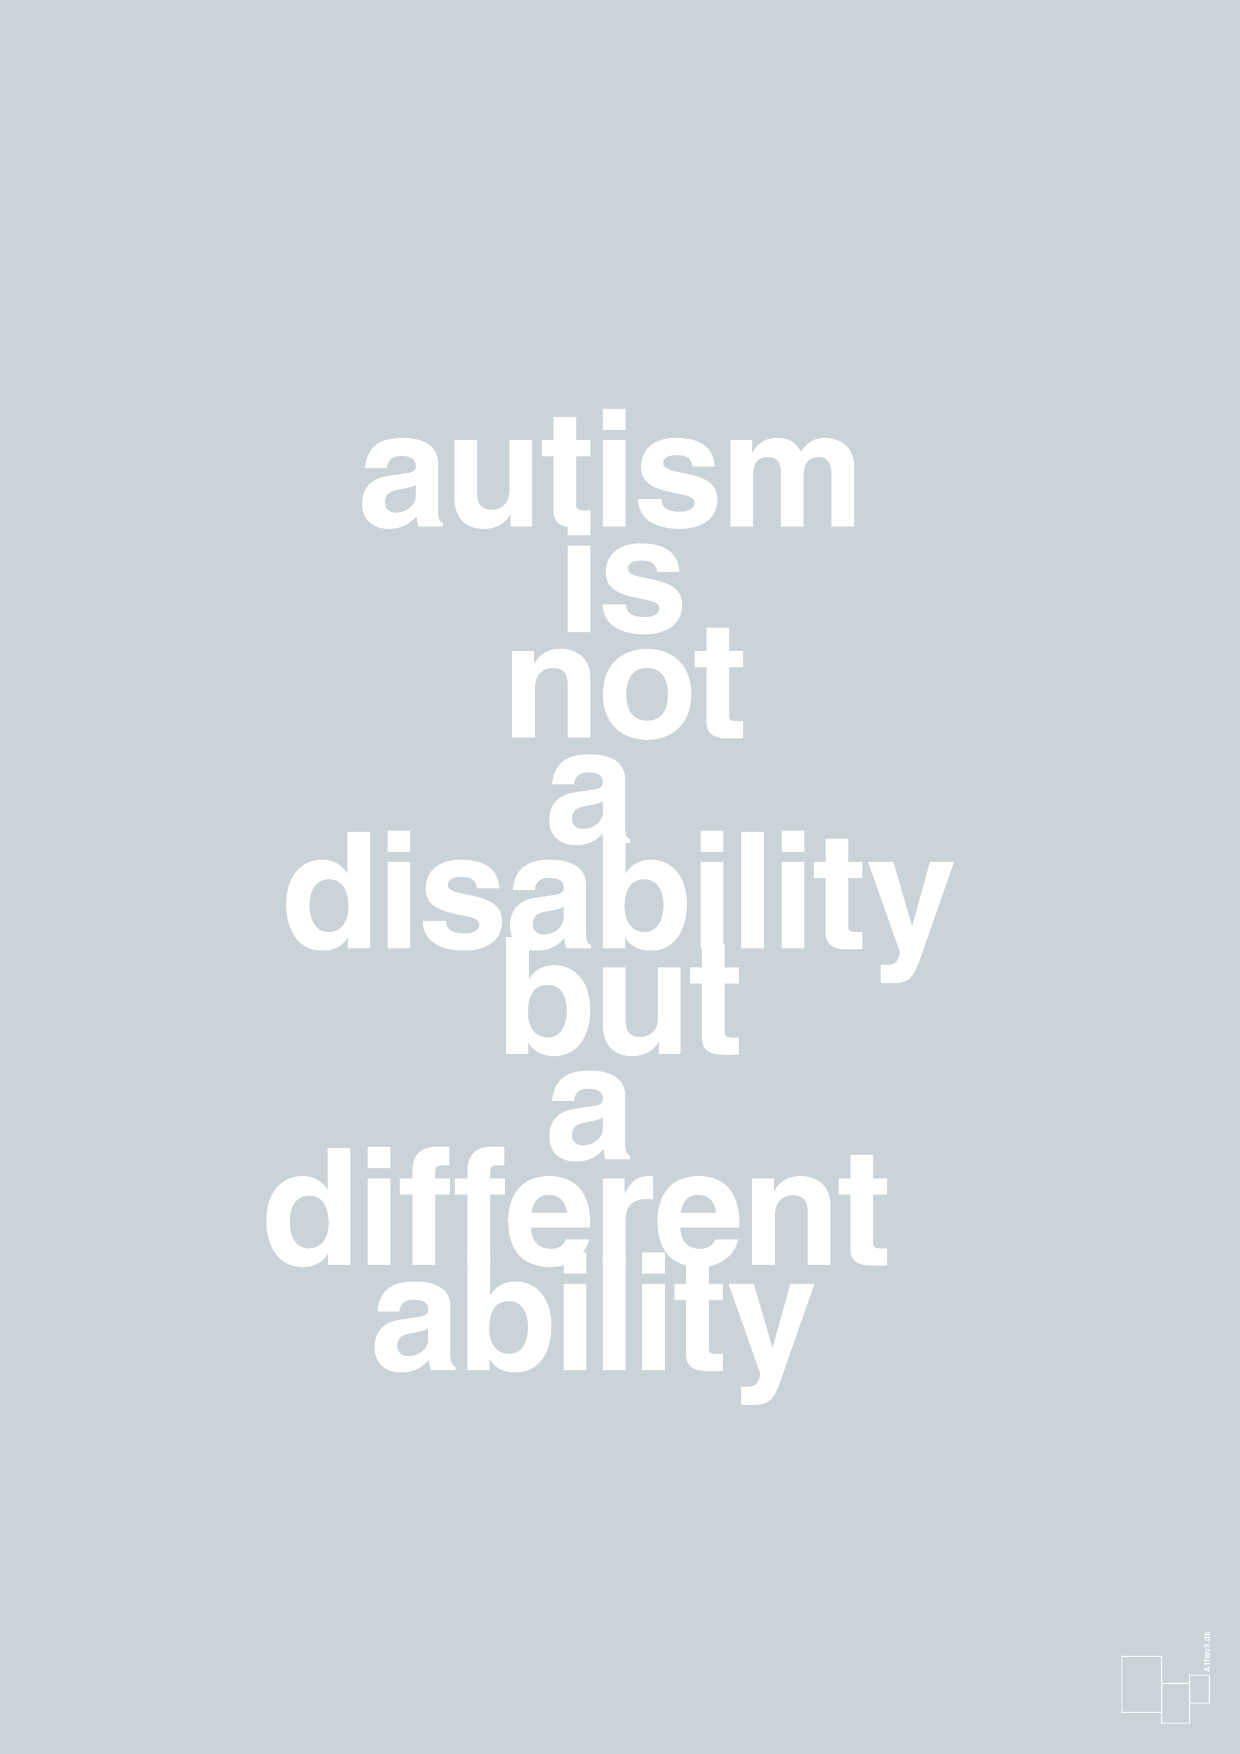 autism is not a disability but a different ability - Plakat med Samfund i Light Drizzle